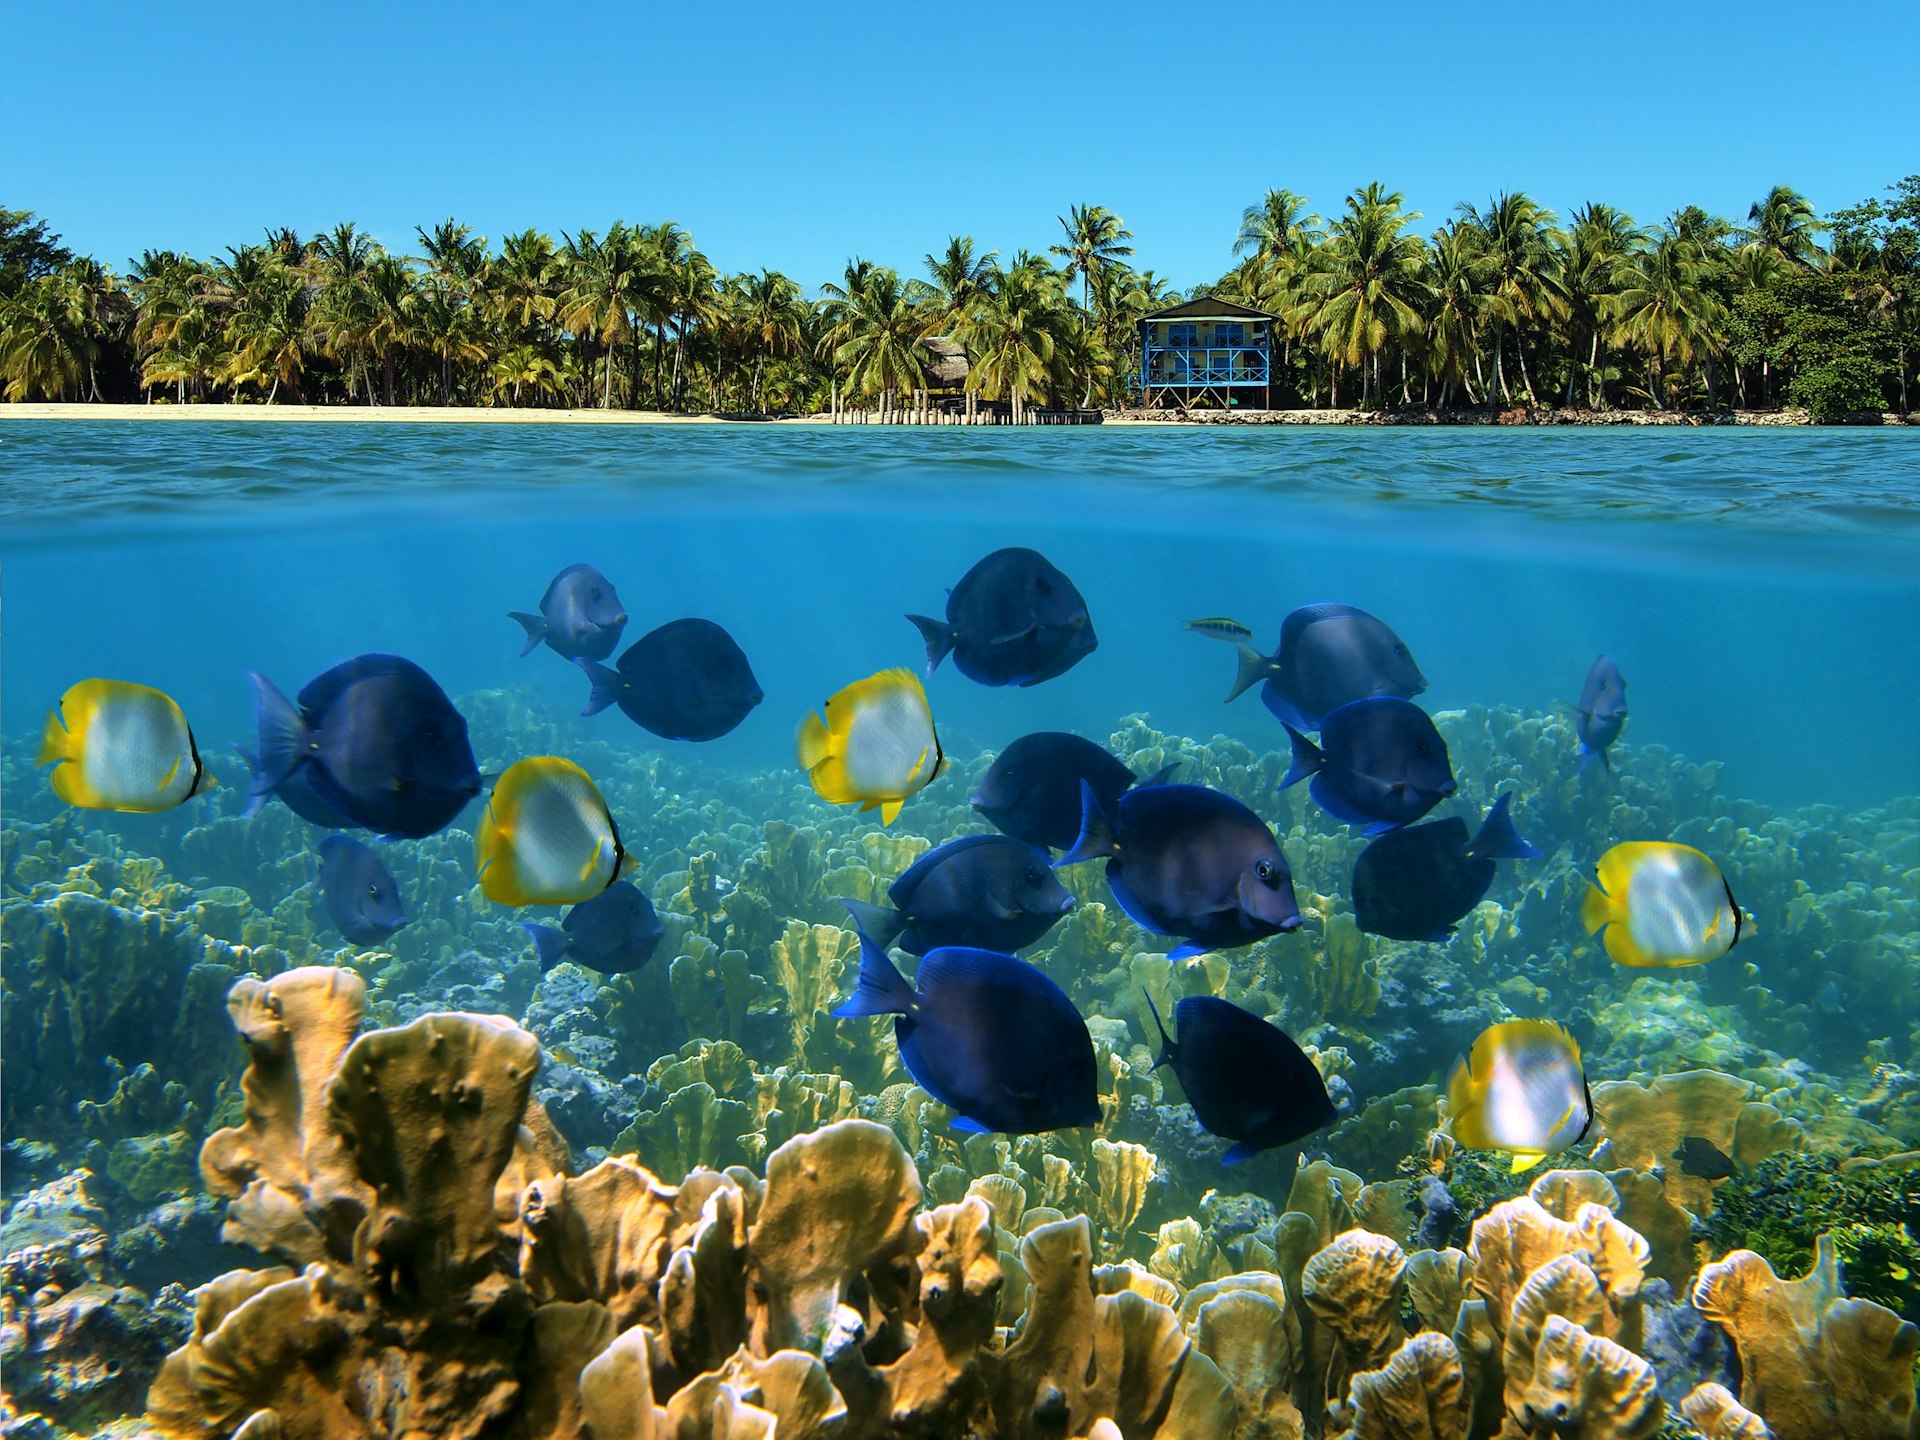 Over under landscape with a school of tropical fish in a coral reef and beach with coconut trees and house at the horizon 